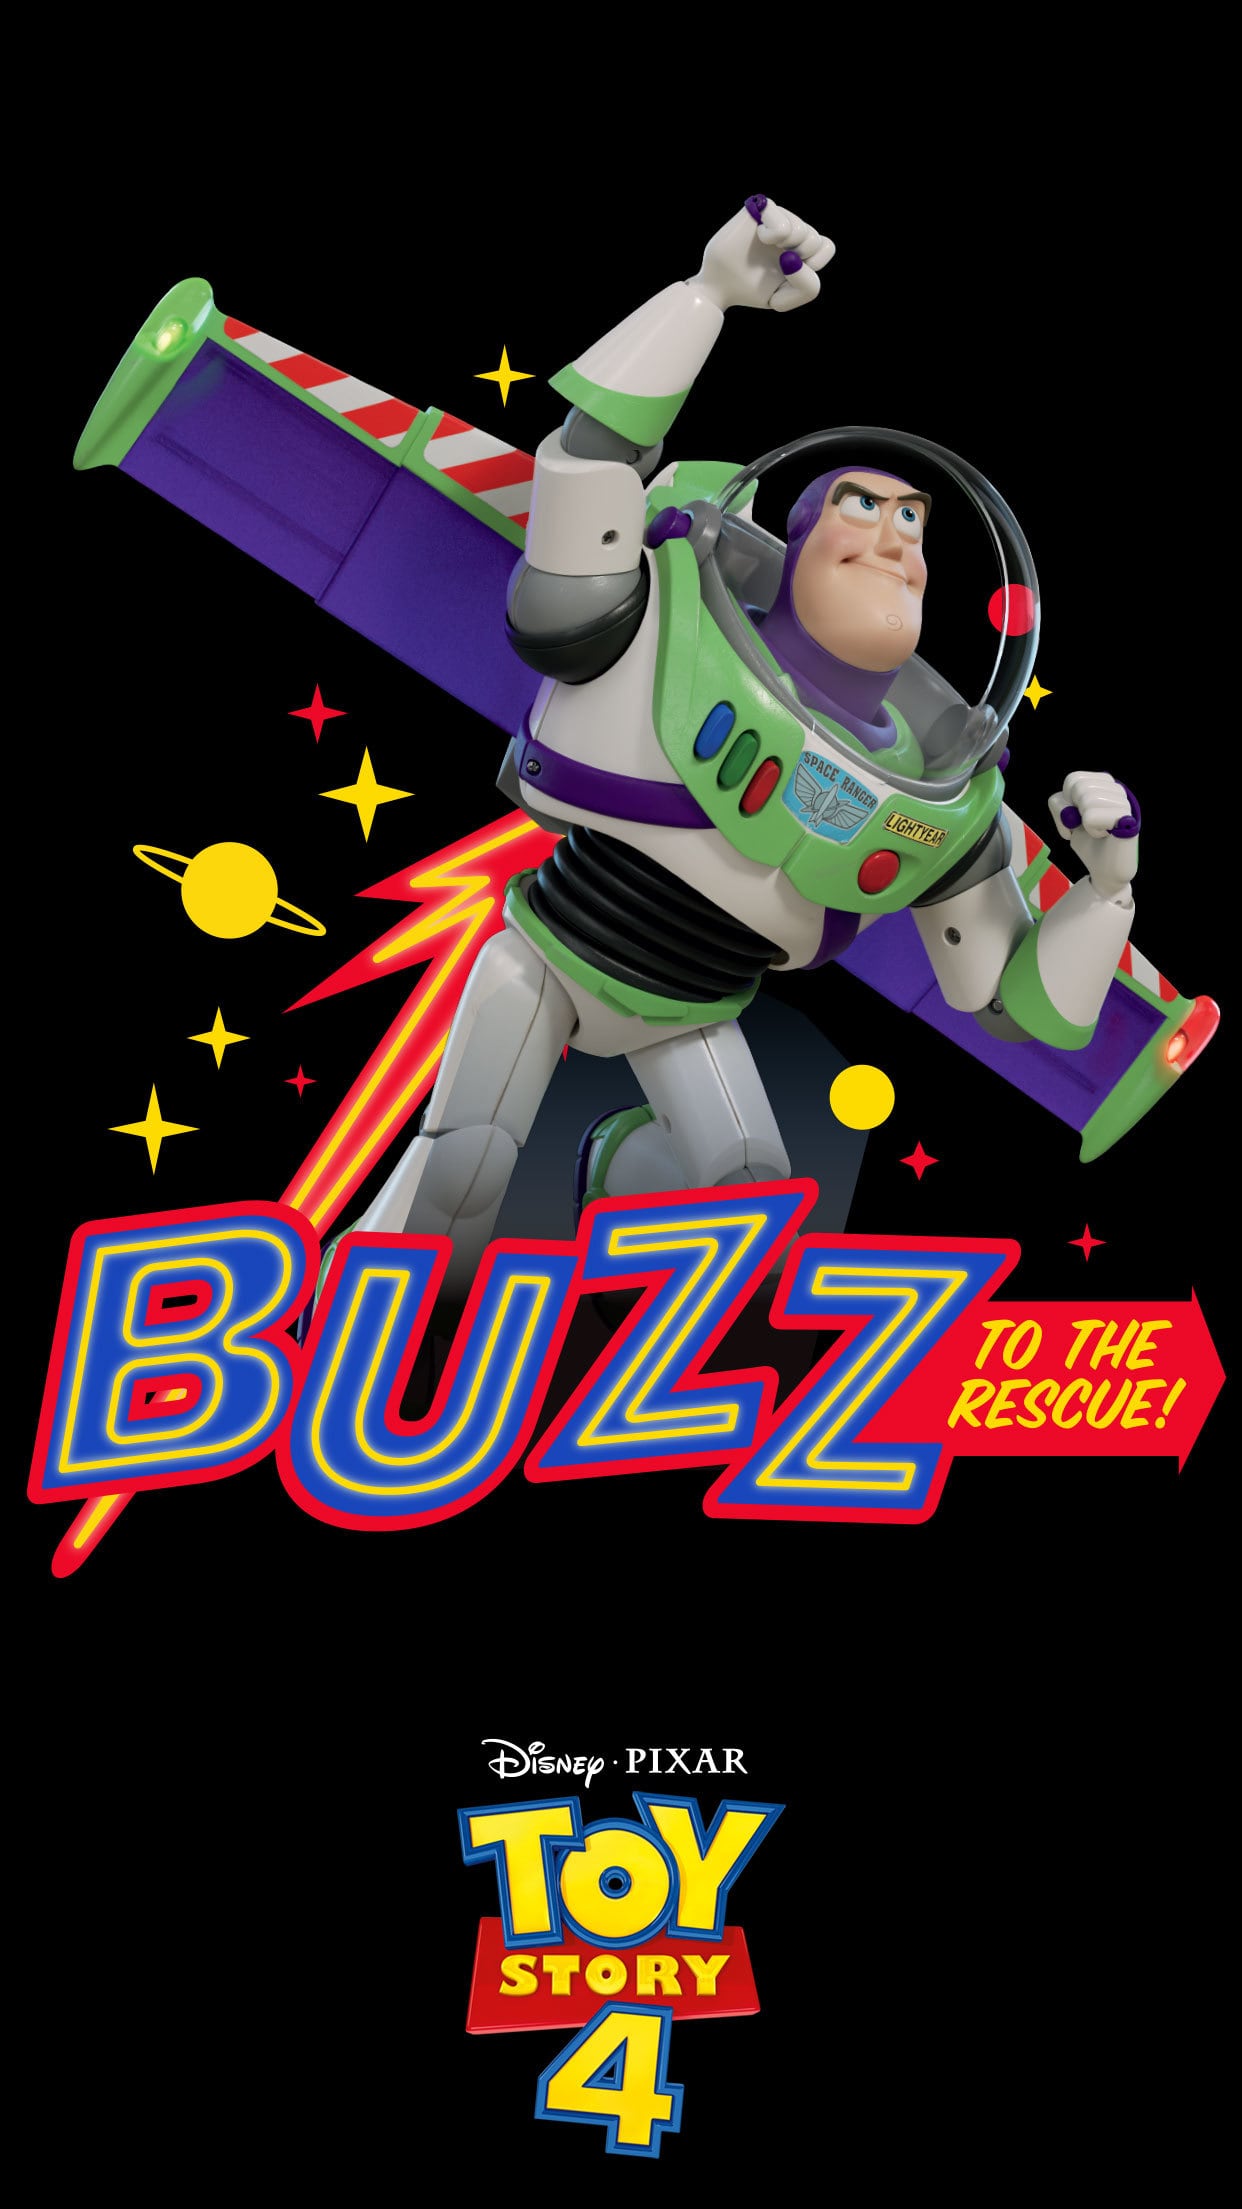 Go To Infinity And Beyond With These Disney and Pixar Toy Story 4